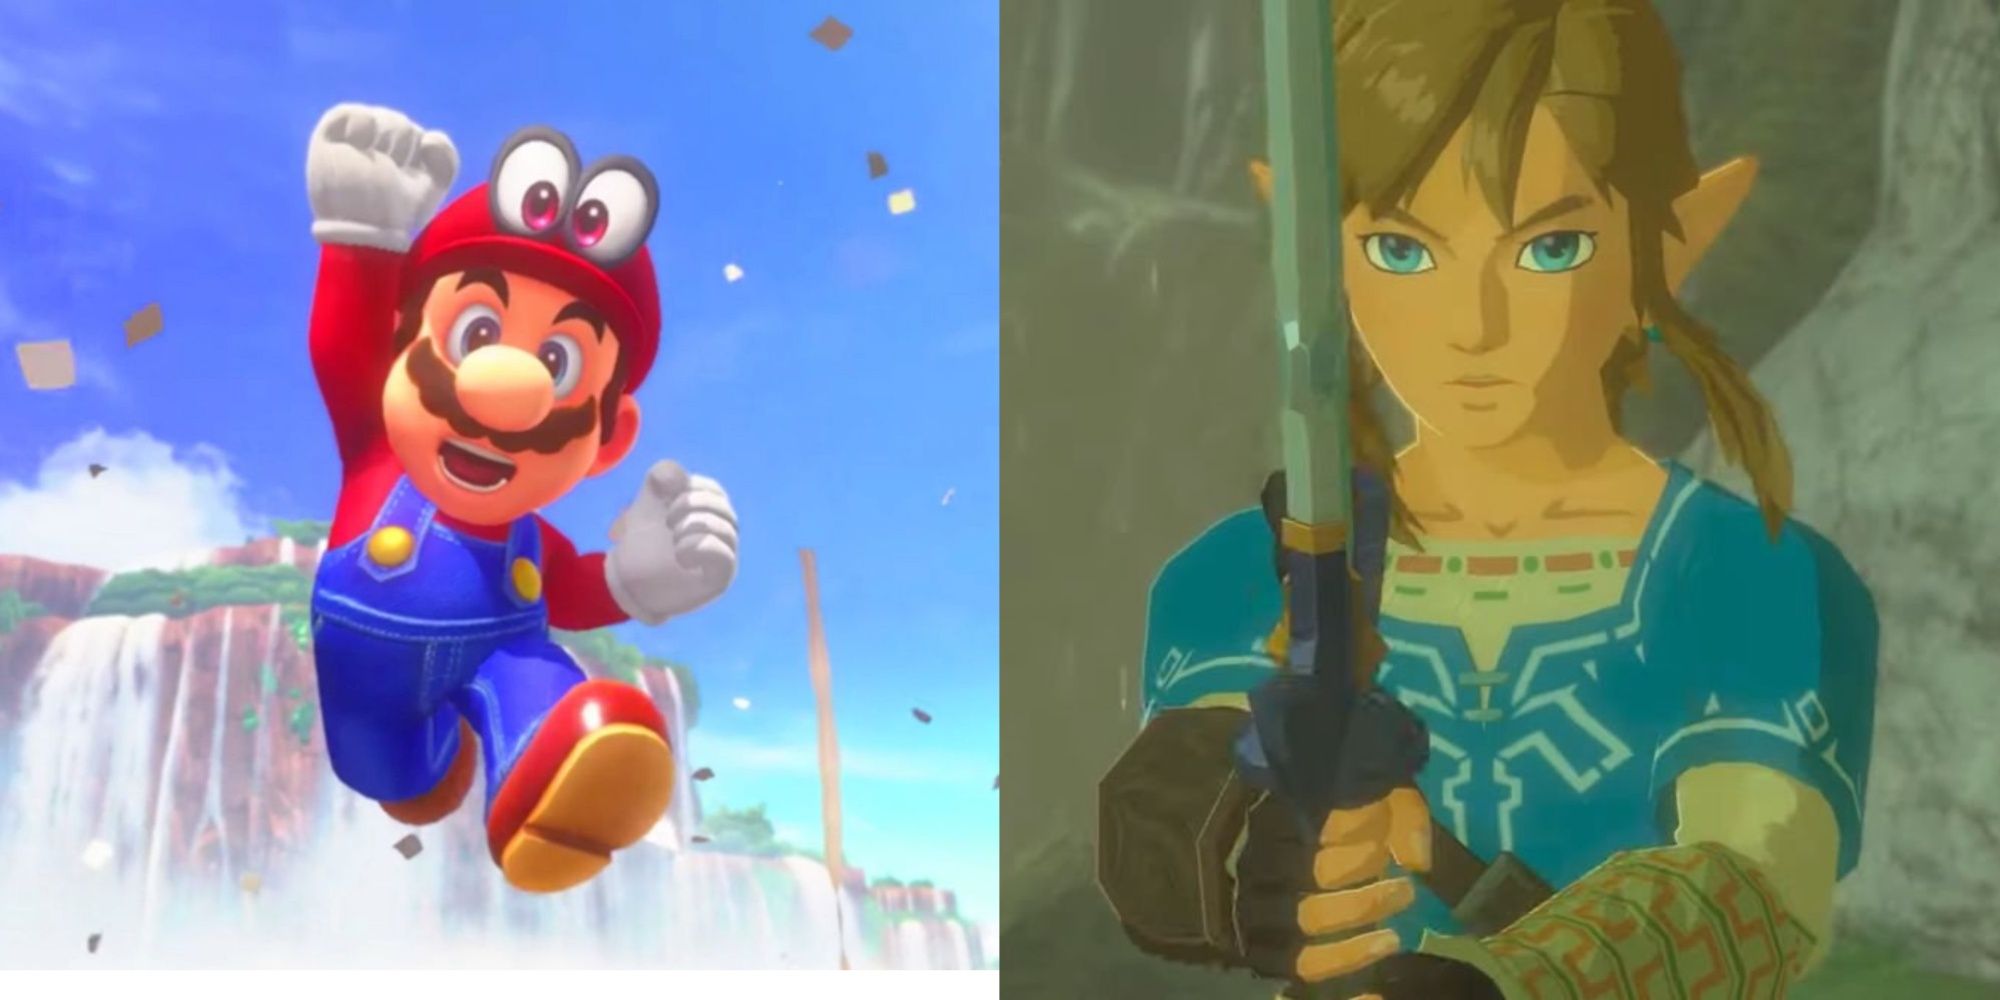 mario jumping in super mario odsyssey, and link holding the master sword in breath of the wild